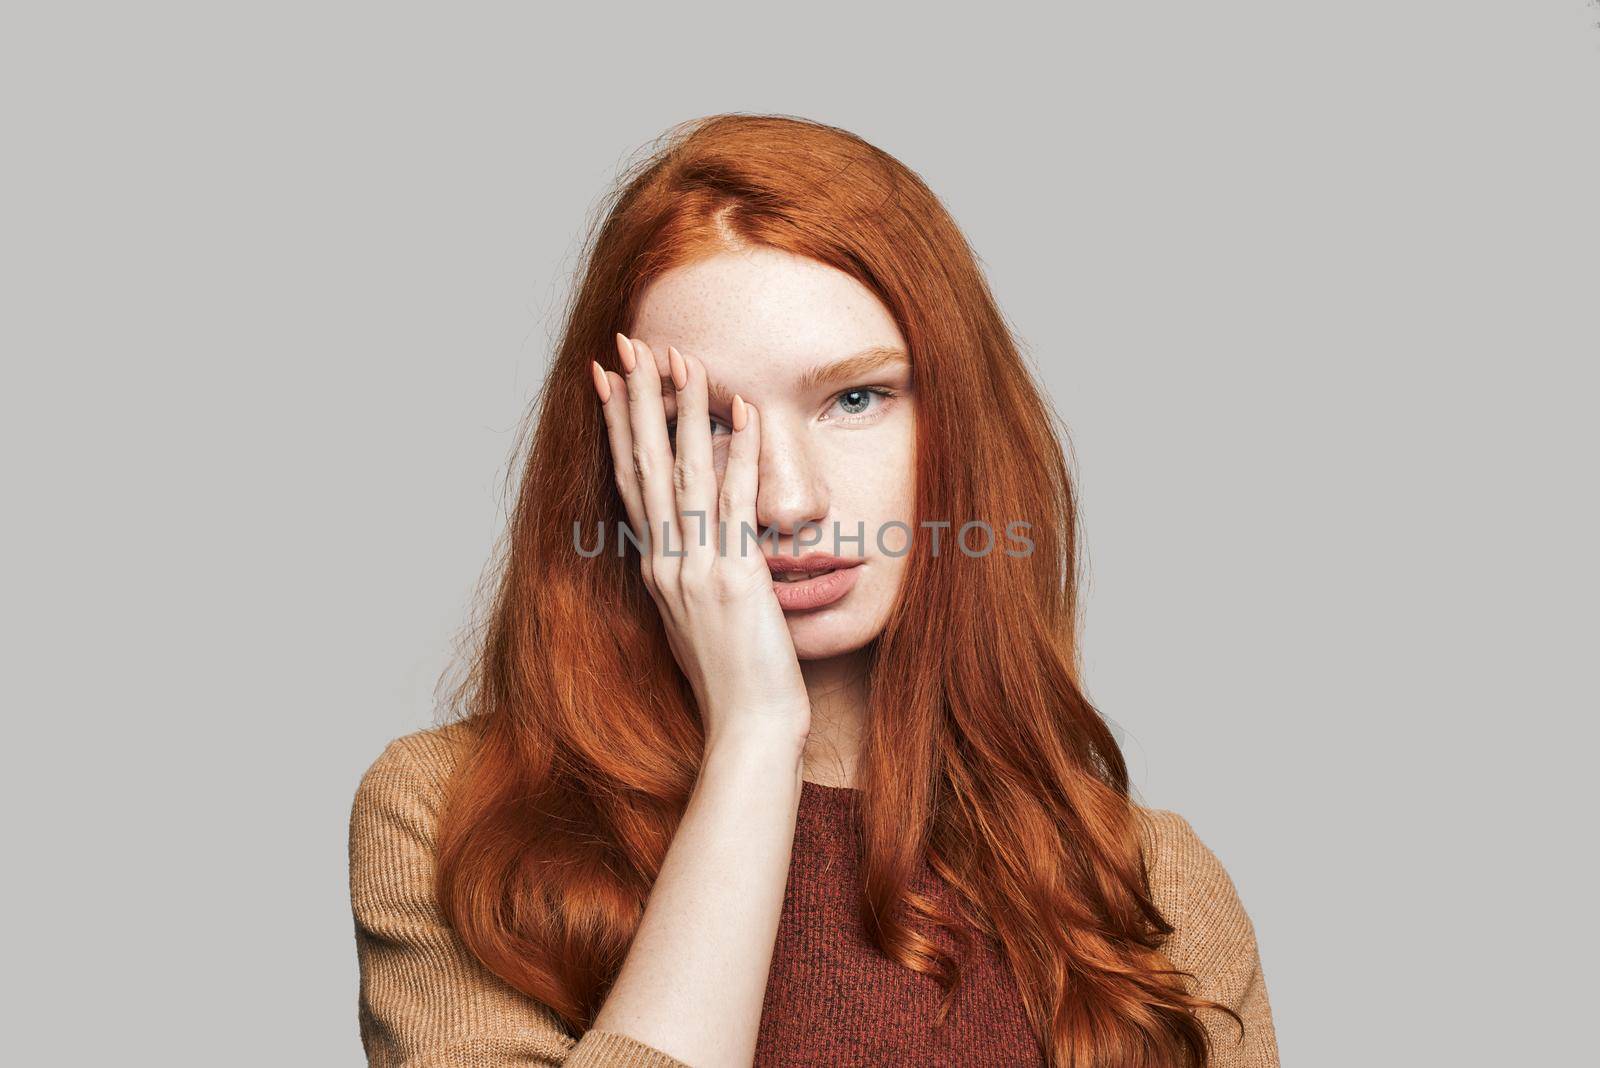 What is there Portrait of young and cute teenage girl with red silky hair covering face with hand and looking at camera while standing against grey background by friendsstock